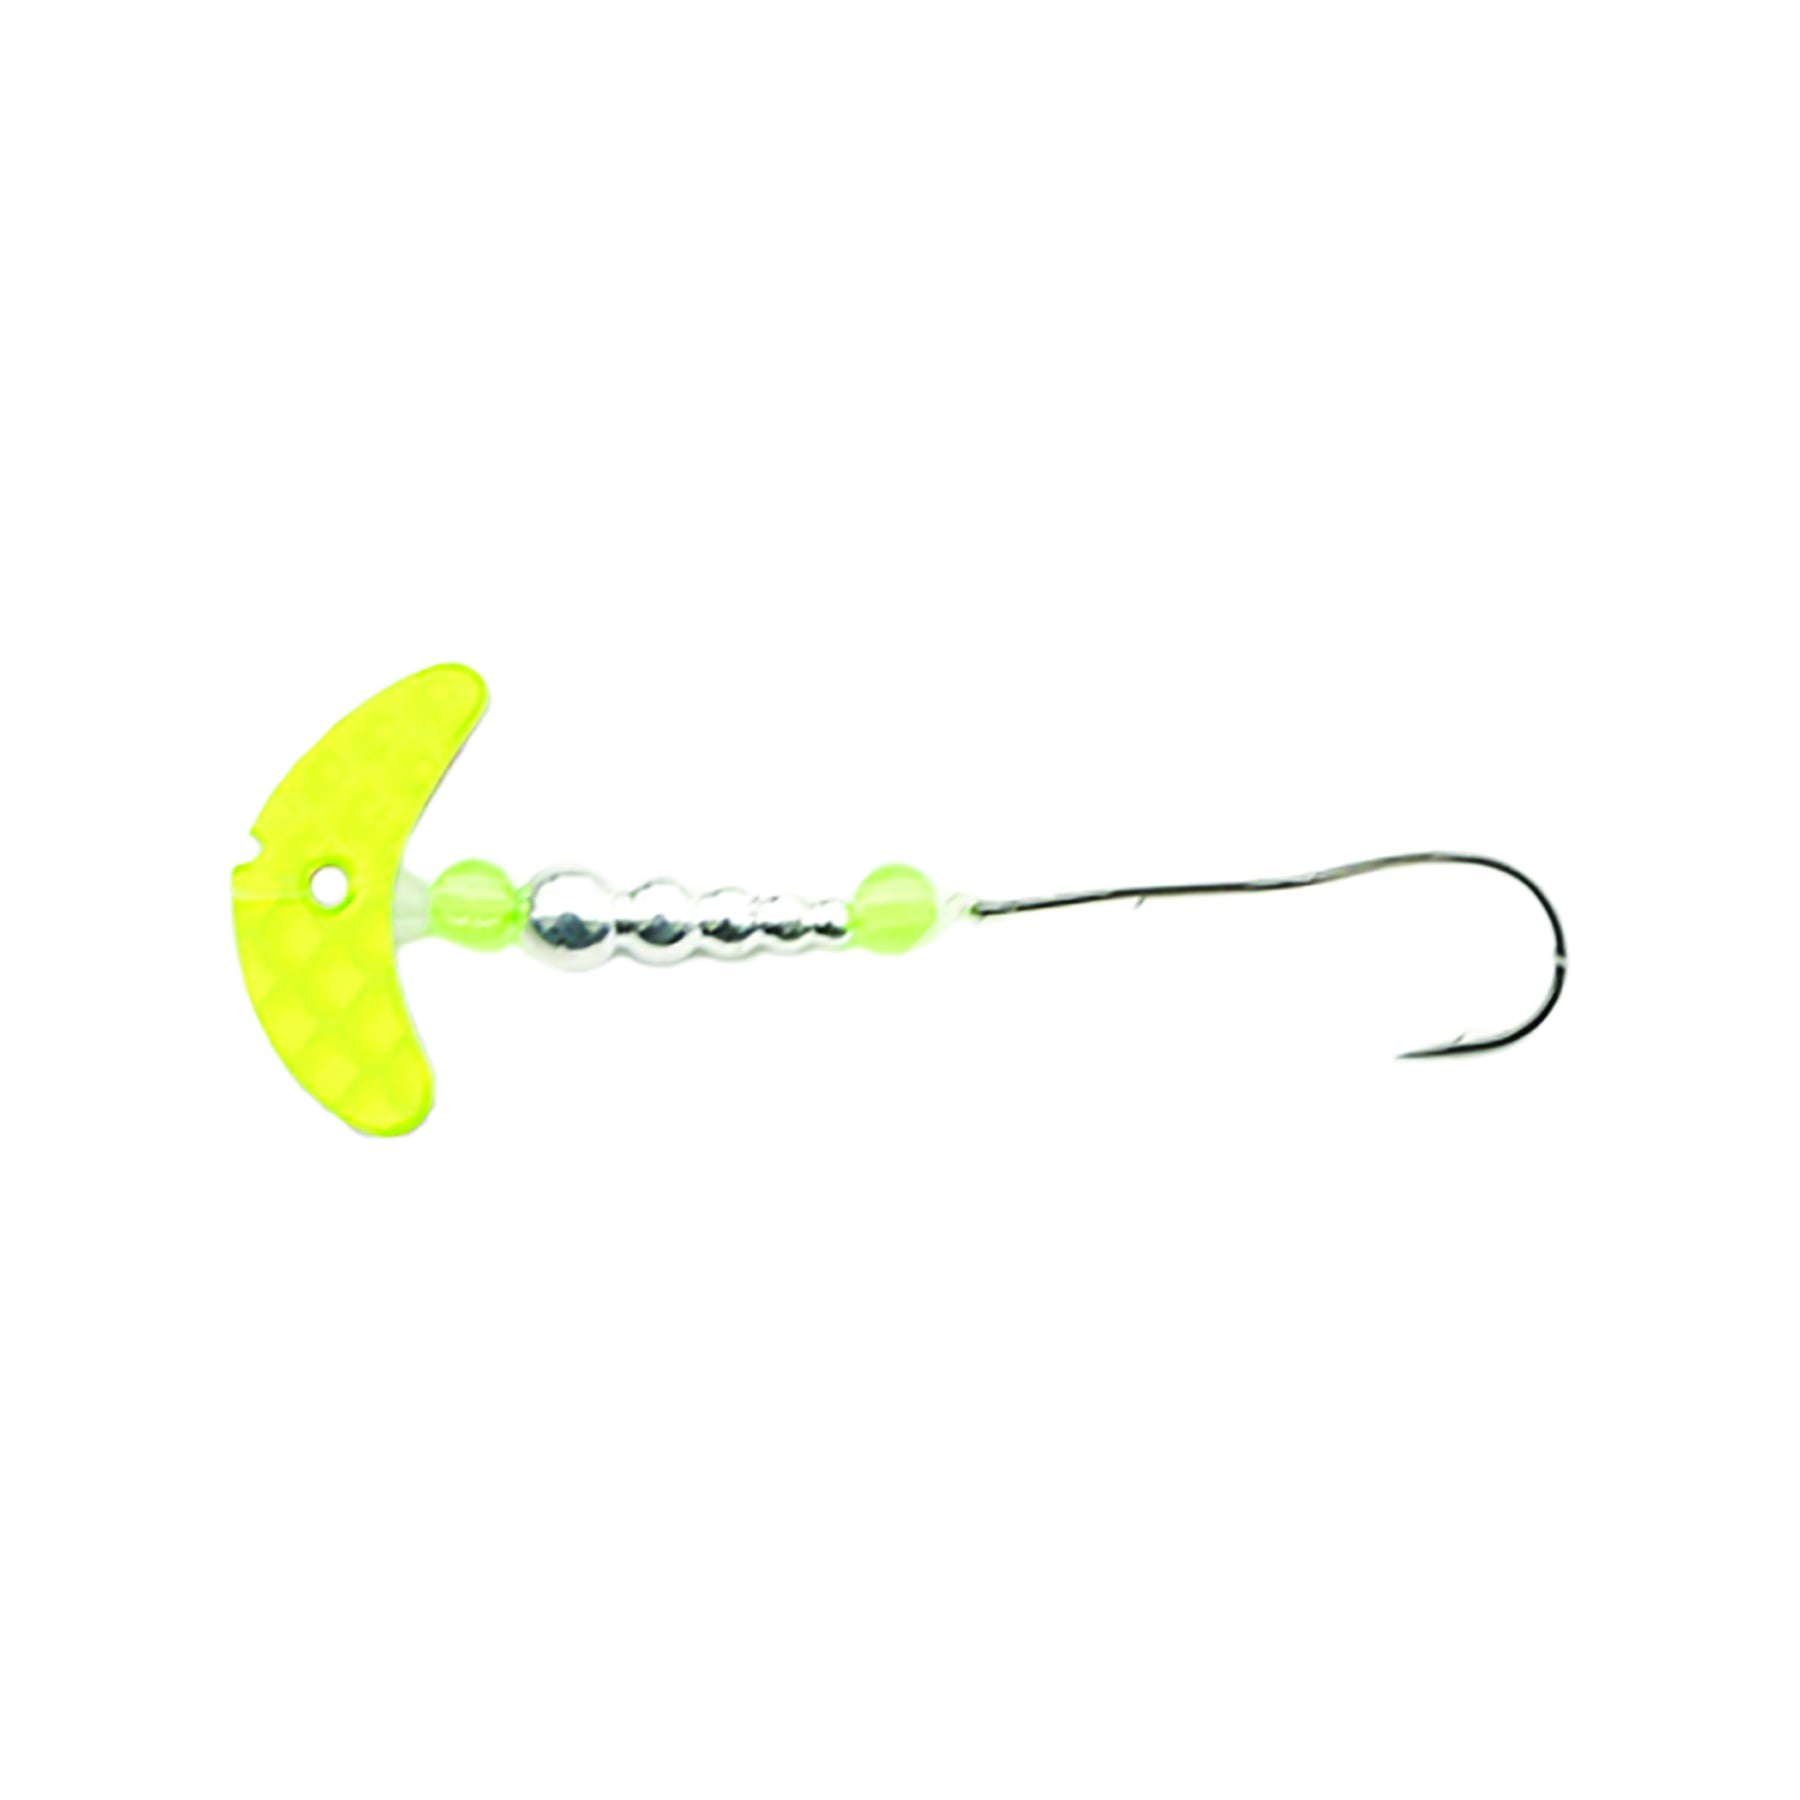 Mack's Smile Blade Super Slow Death RIG: Chartreuse Scale/silver